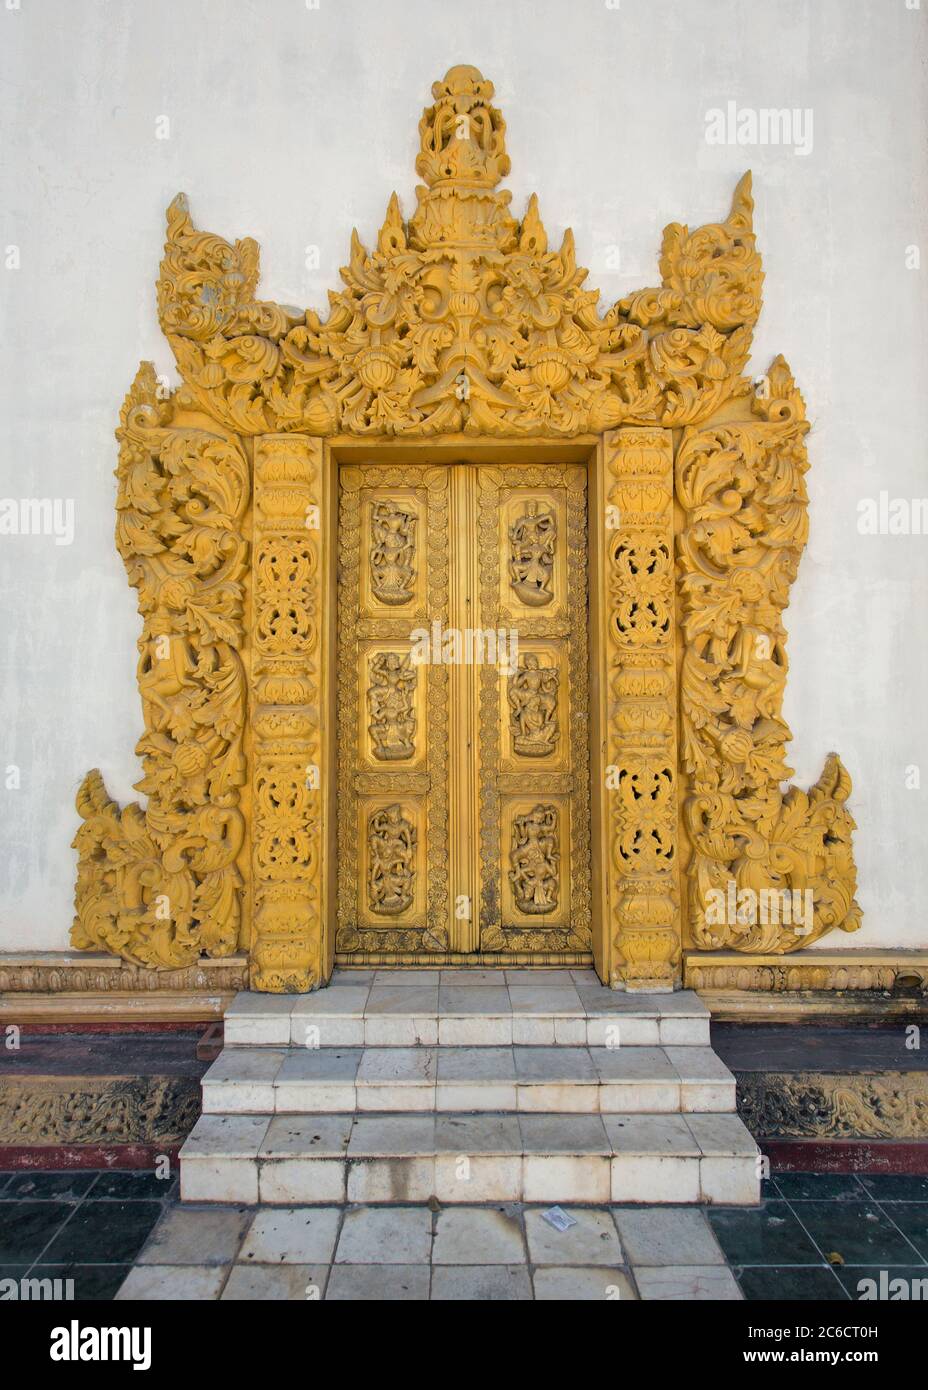 An exterior view of an intricately carved and gilded wooden door of an ancient temple in Bagan, Myanmar Stock Photo